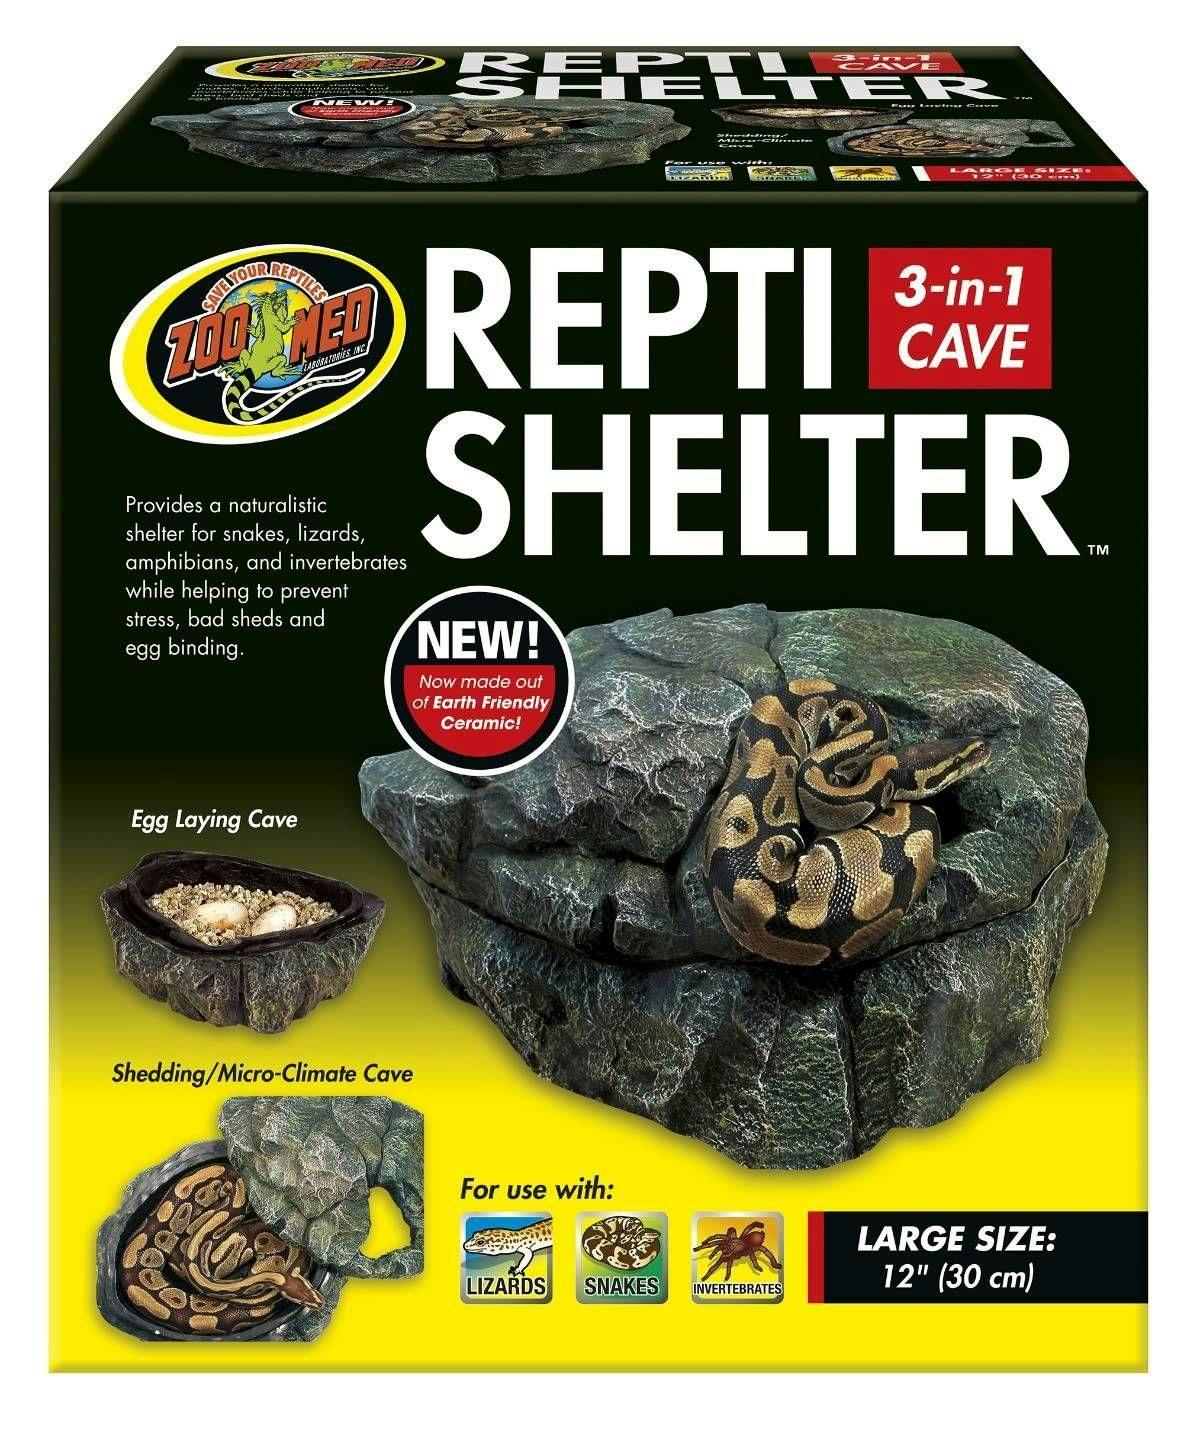 Image for Zoo Med Repti Shelter 3-in-1 Cave (Large) by Josh's Frogs